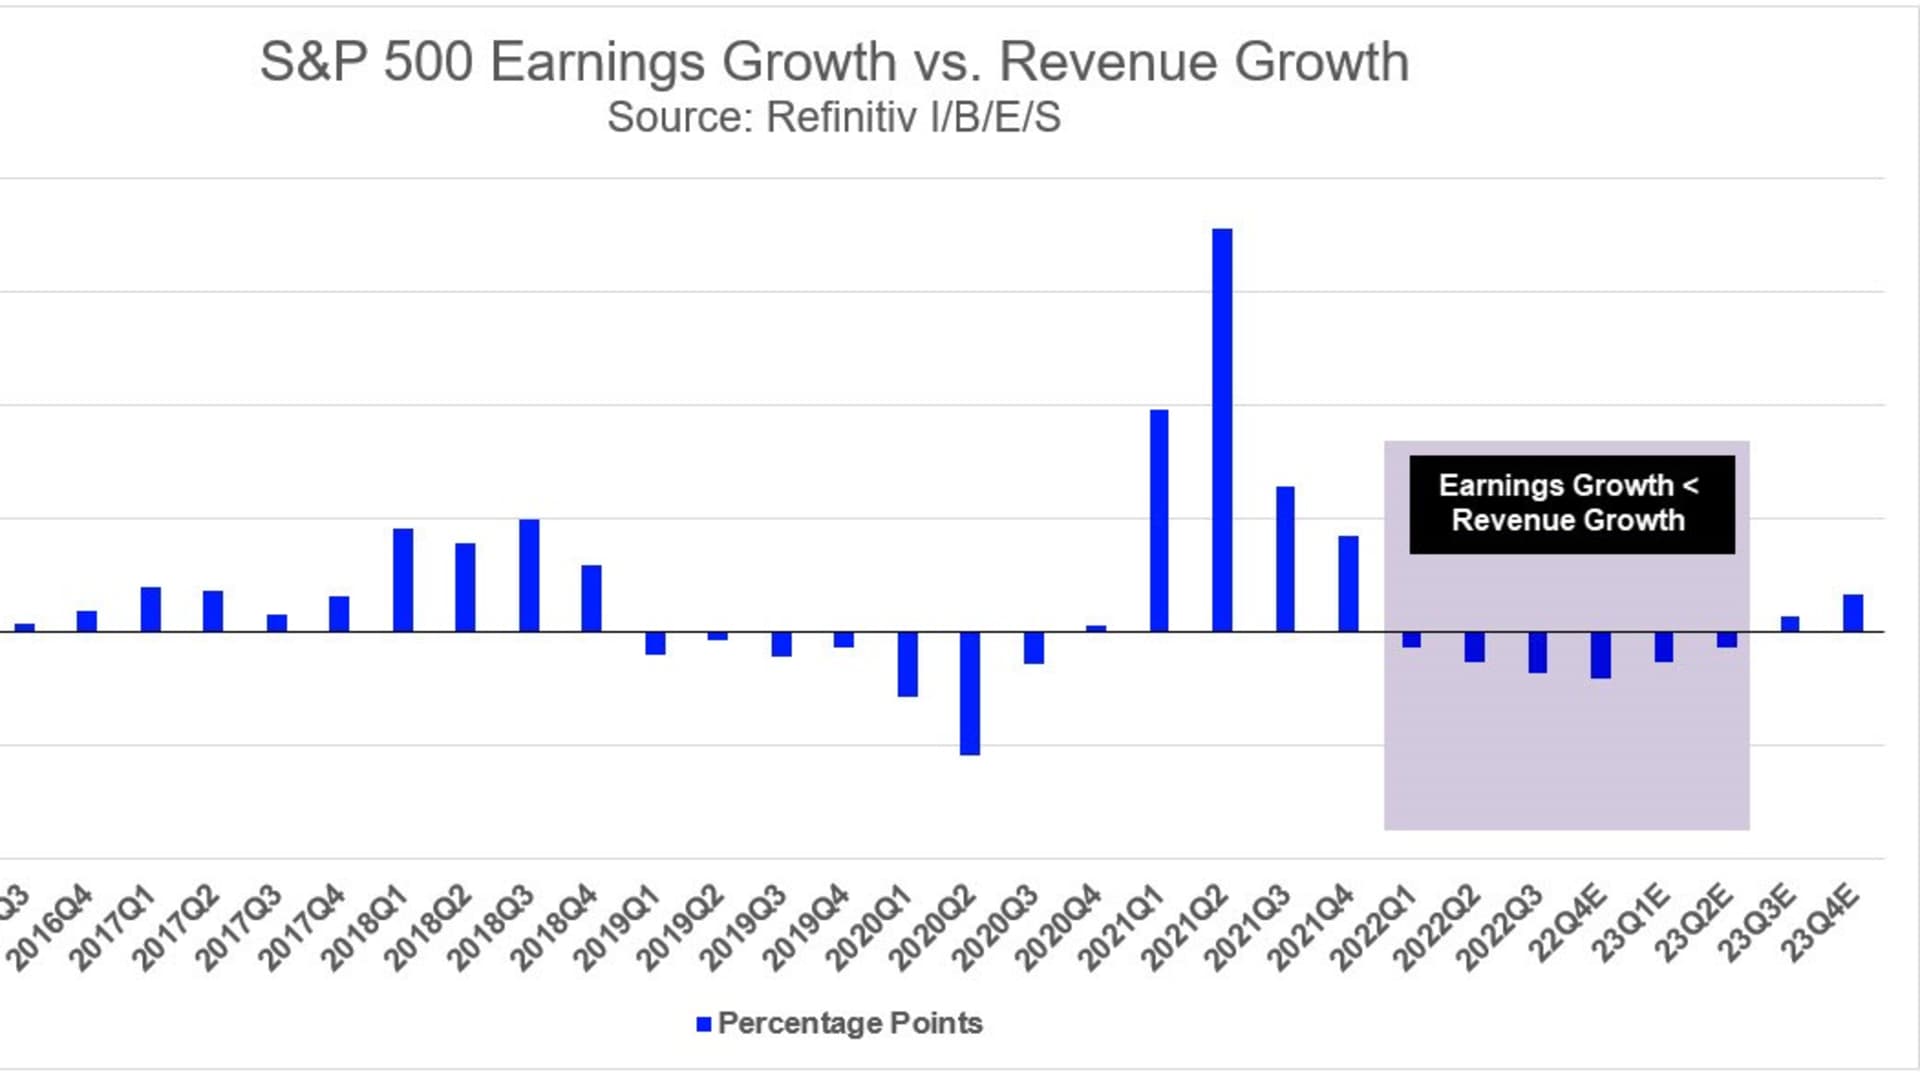 The negative bar indicates earnings growth is lower than revenue growth, pressuring margins. Source: Refinitiv